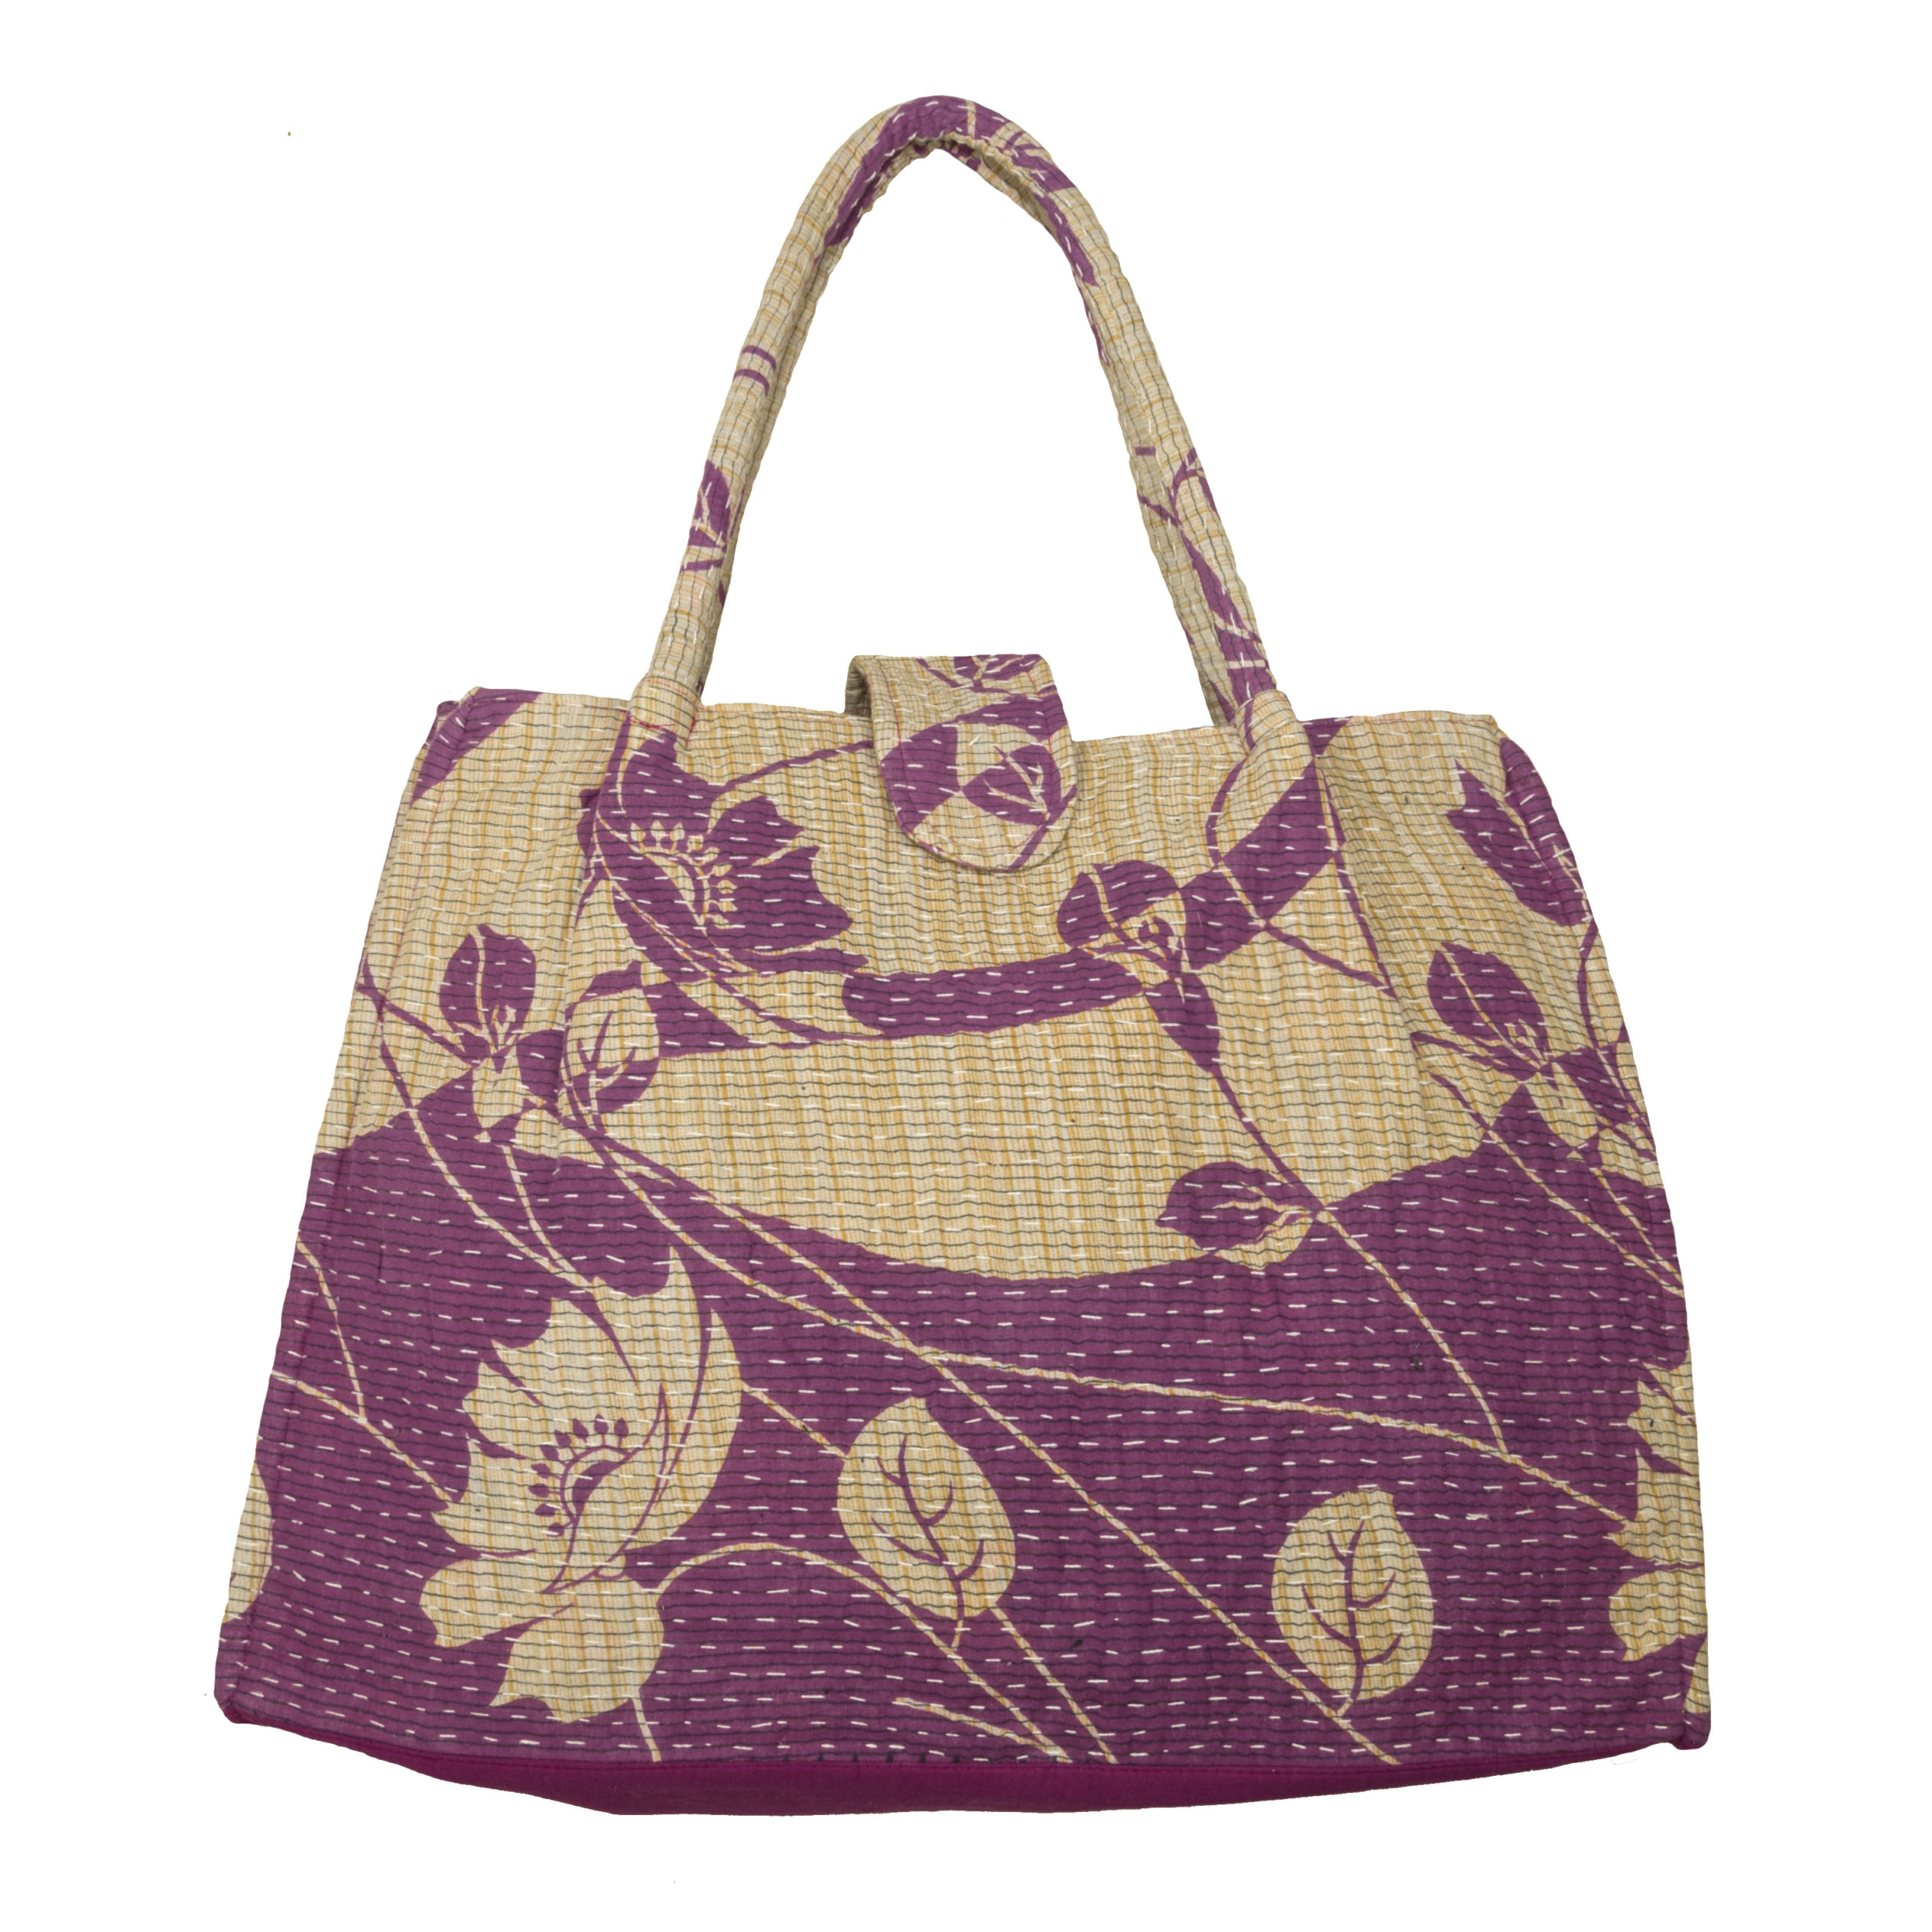 Kantha Bag - Pinky Purple with Off White Flower design - Camilla Costello